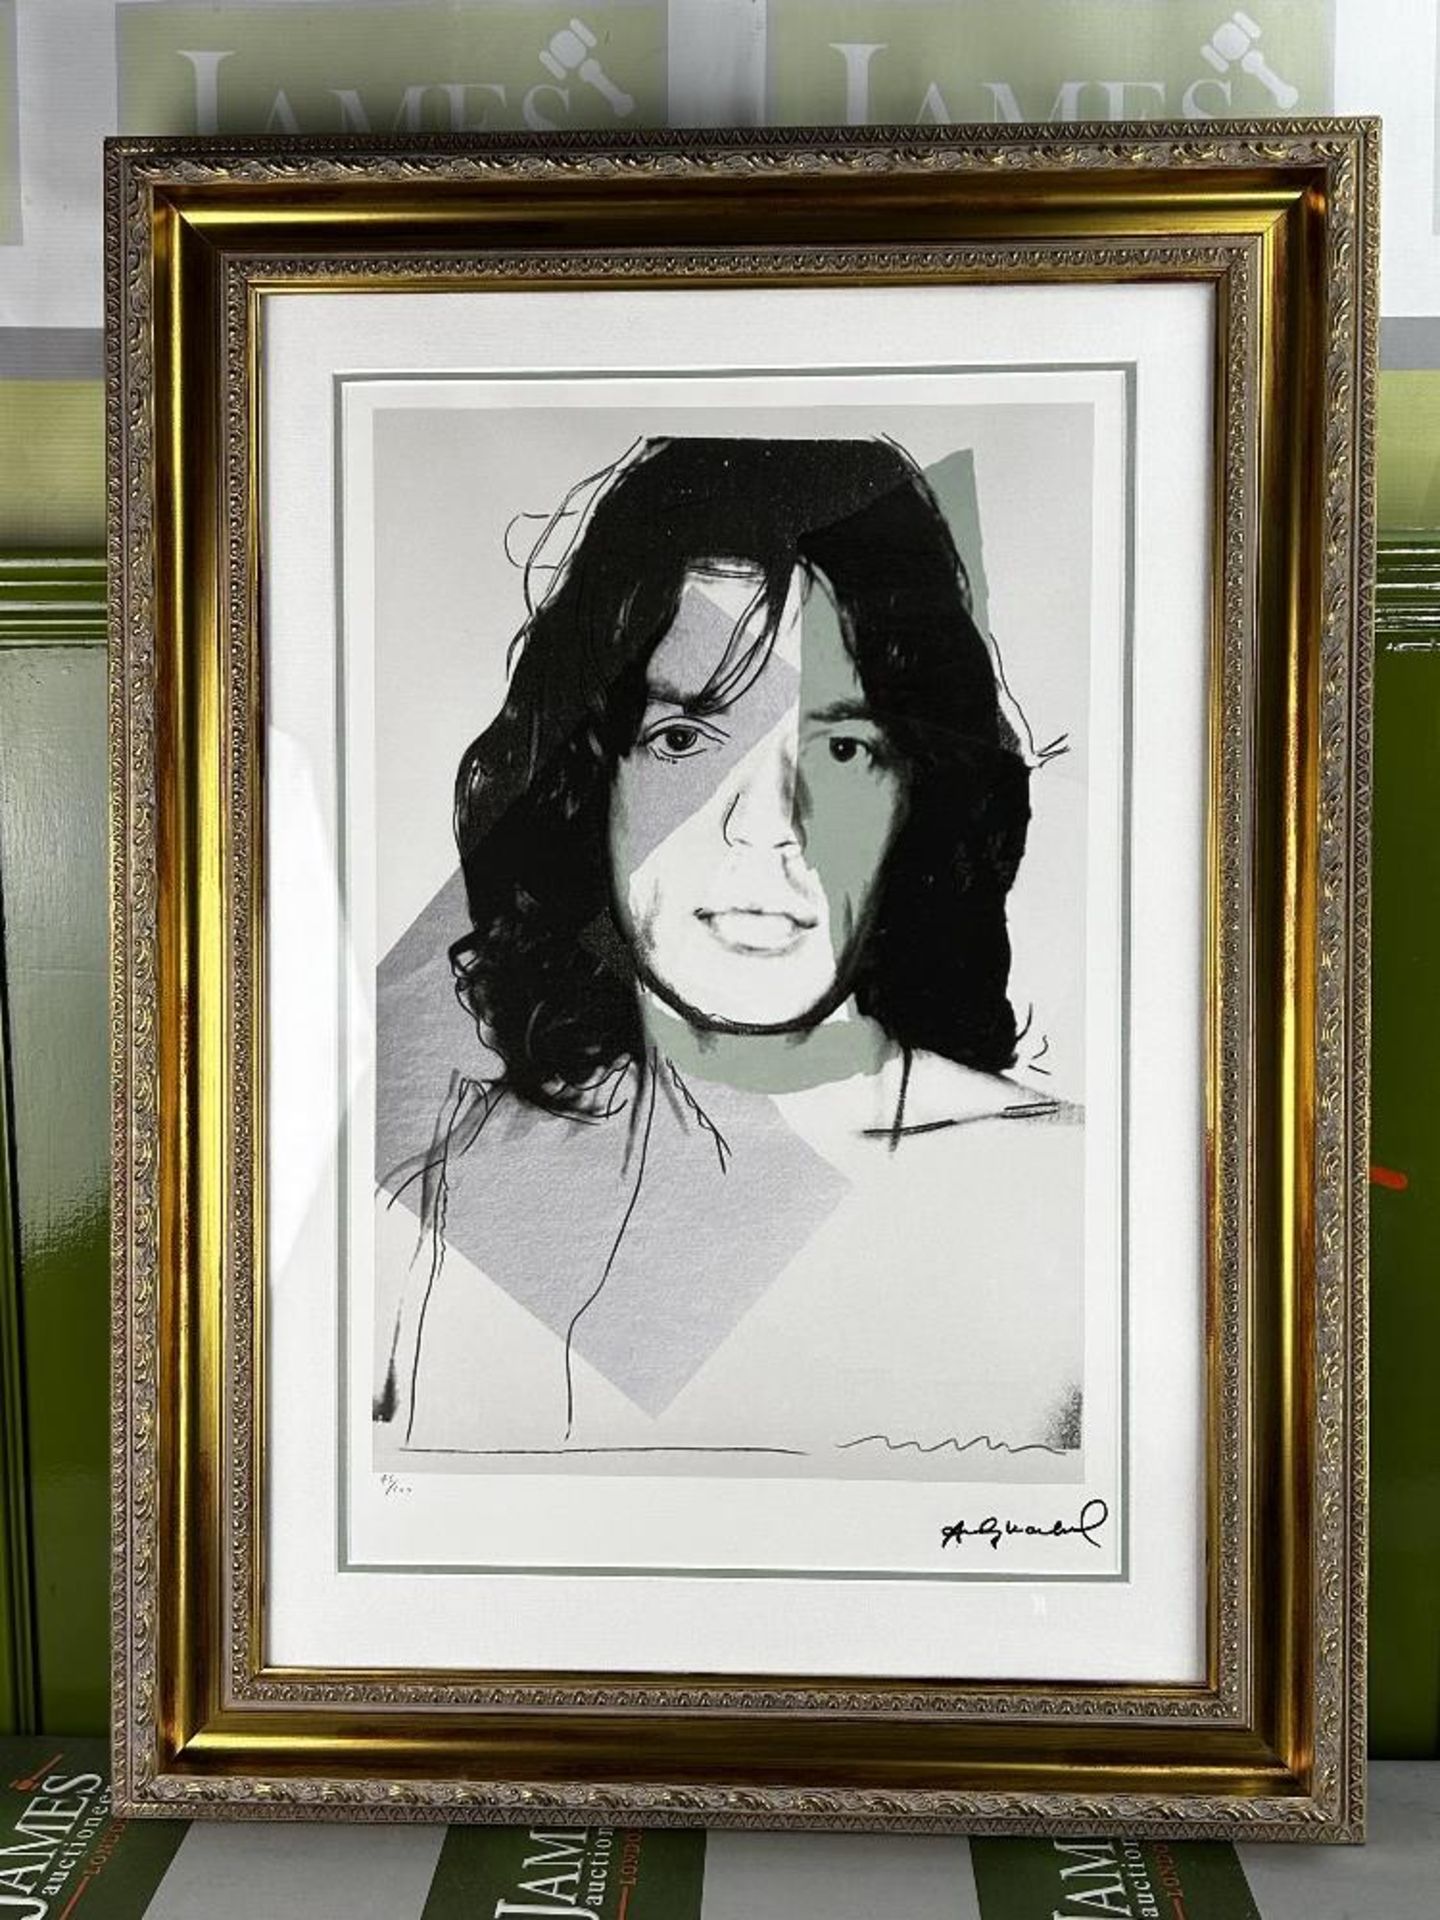 Andy Warhol-(1928-1987) "Jagger" Numbered Lithograph - Image 7 of 7